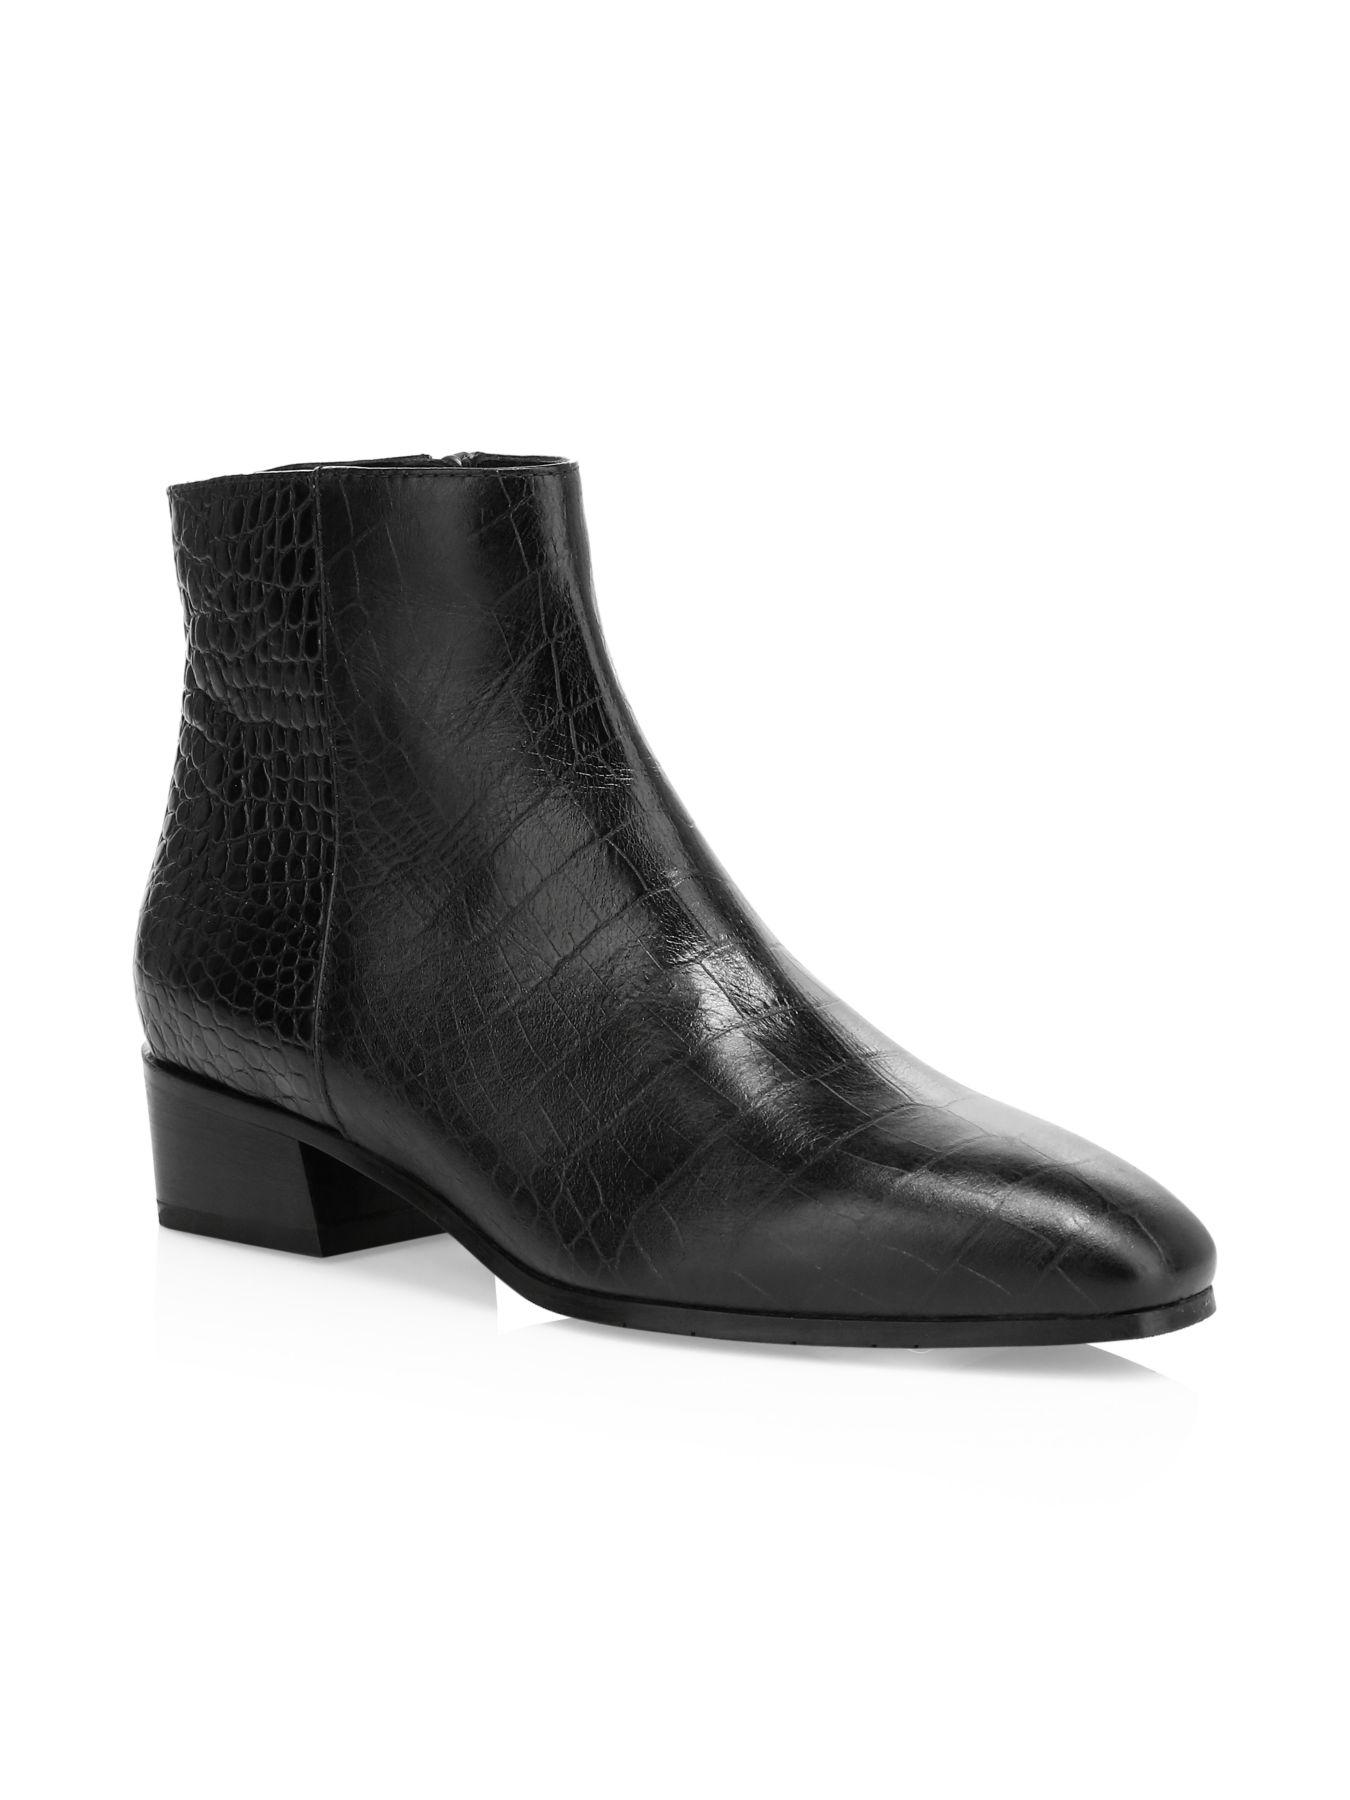 Aquatalia Fuoco Croc-embossed Leather Ankle Boots in Black - Lyst